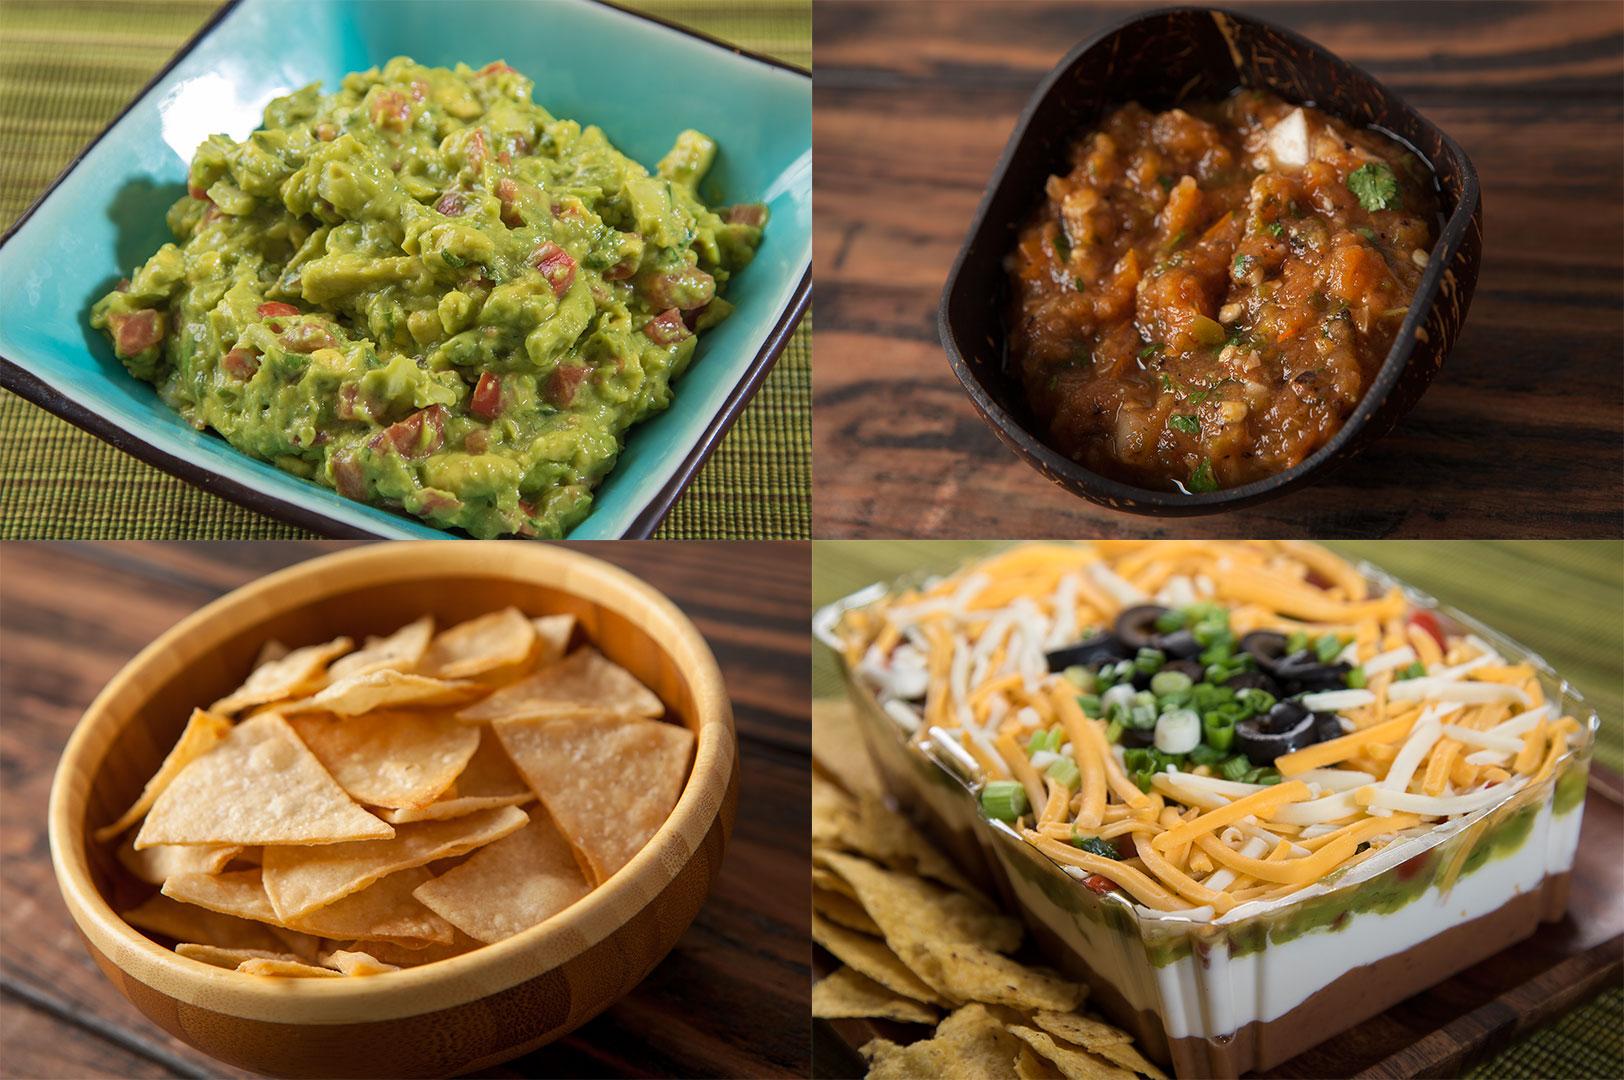 Guacamole, salsa, corn chips and 7-layer dip